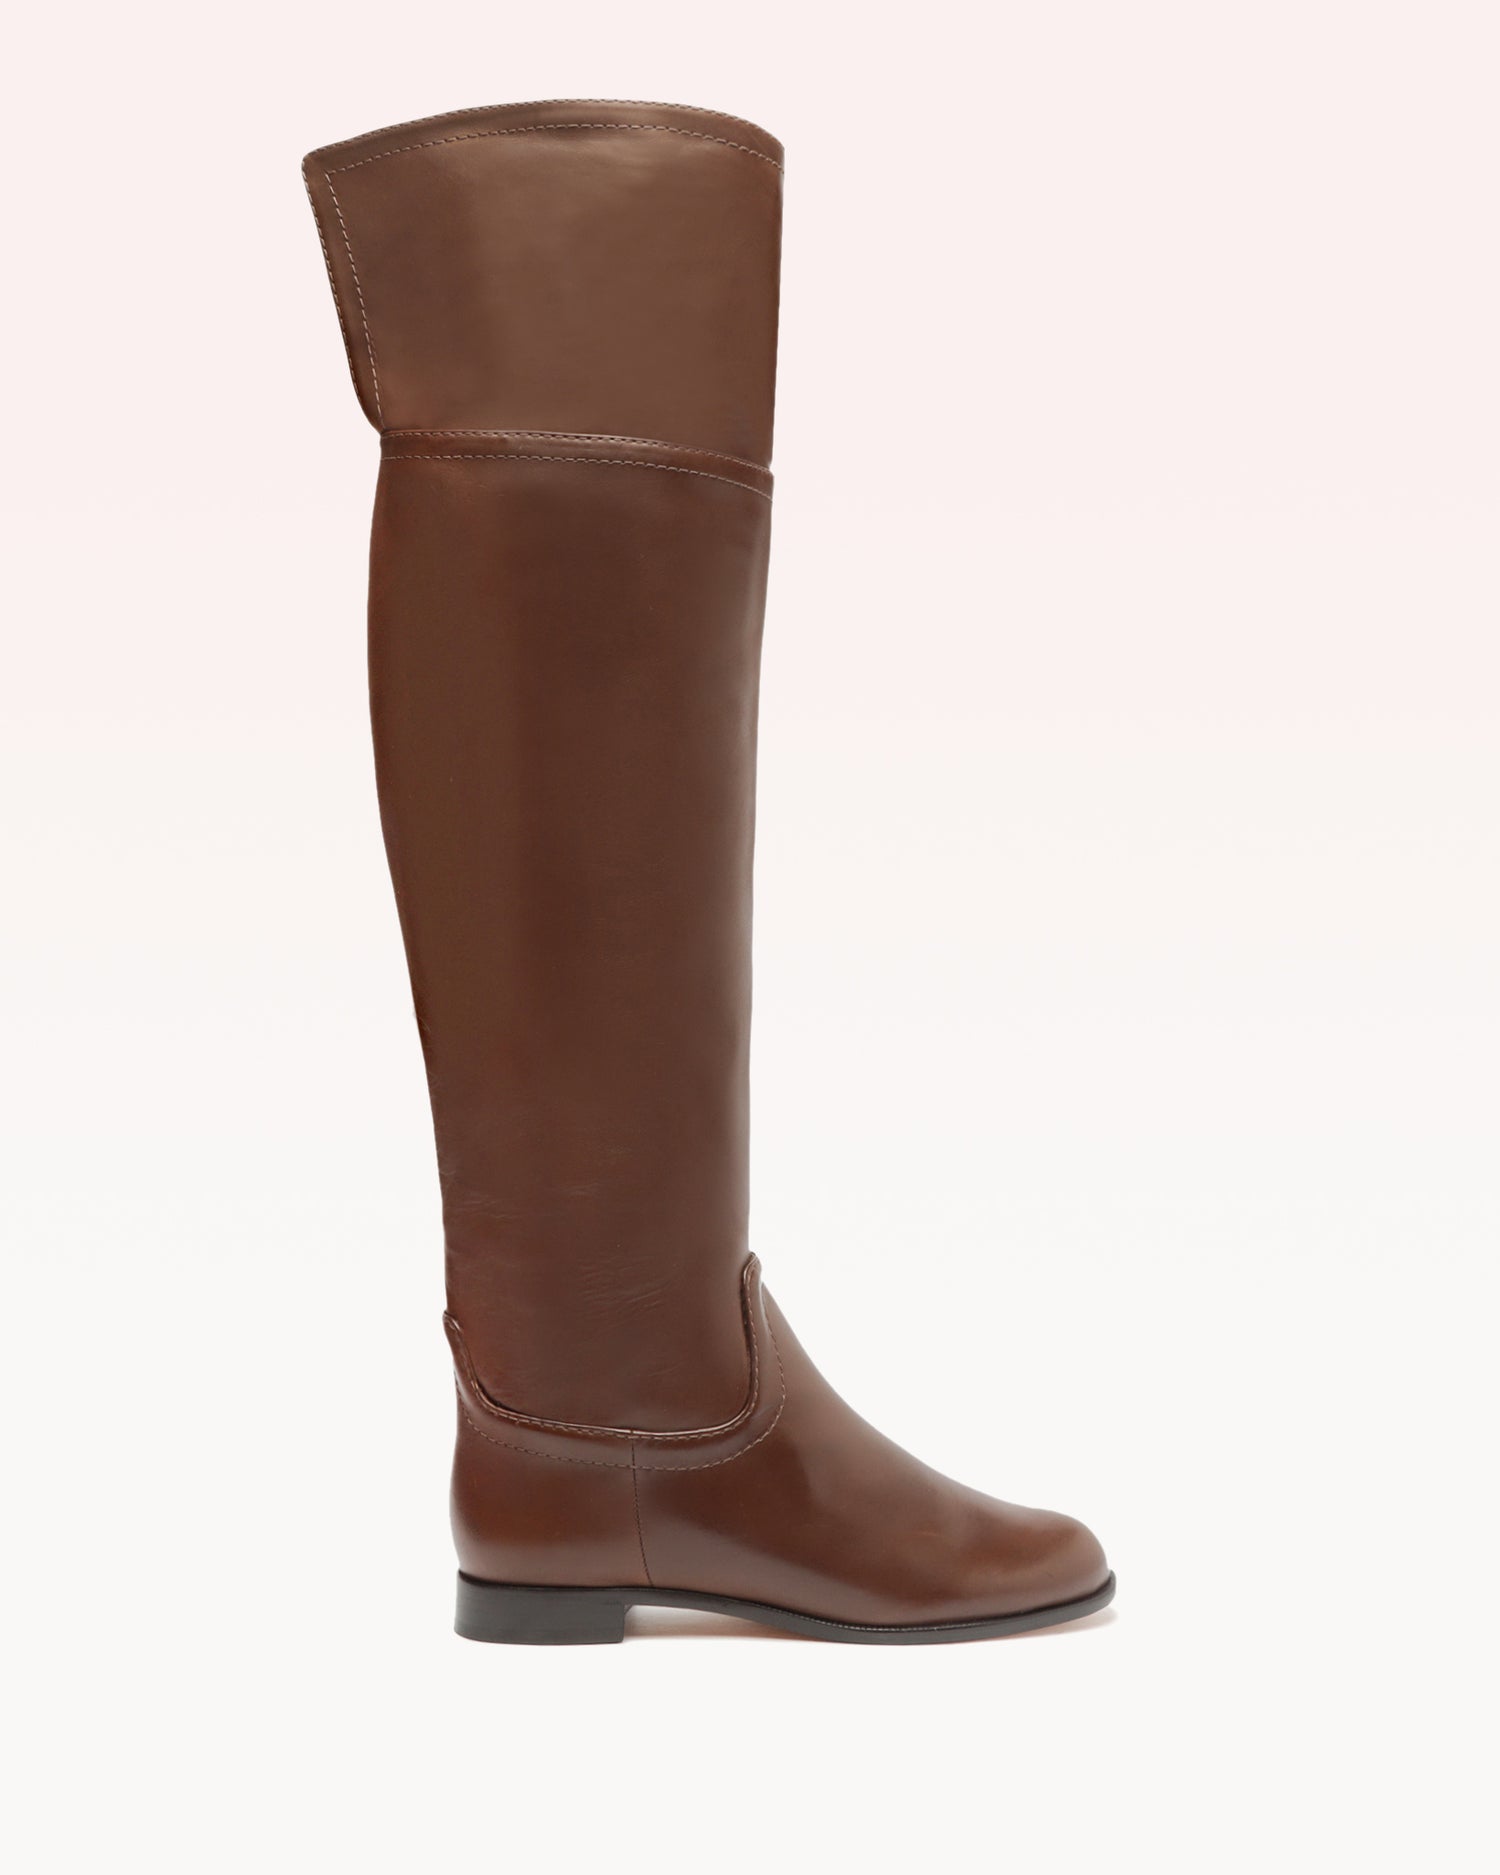 Lauren Over the Knee Boot Mousse Boots F/23 35 Mousse Calf Leather